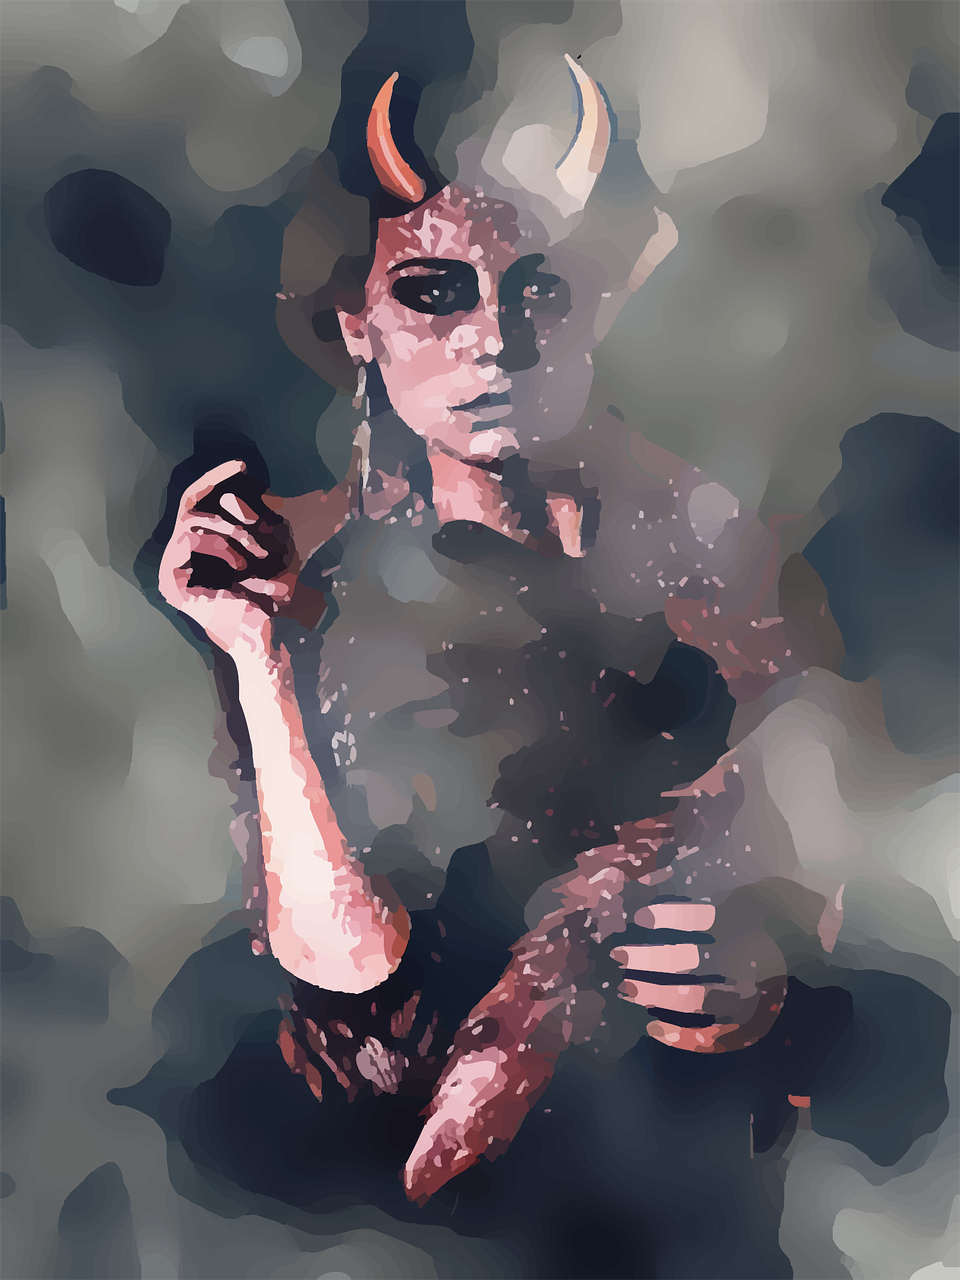 a digital painting of a man with horns on his head, a digital painting, inspired by Leonor Fini, digital art, gothic girl smoking a cigarette, rotoscoped, young glitched woman, girl at a fashion show in hell